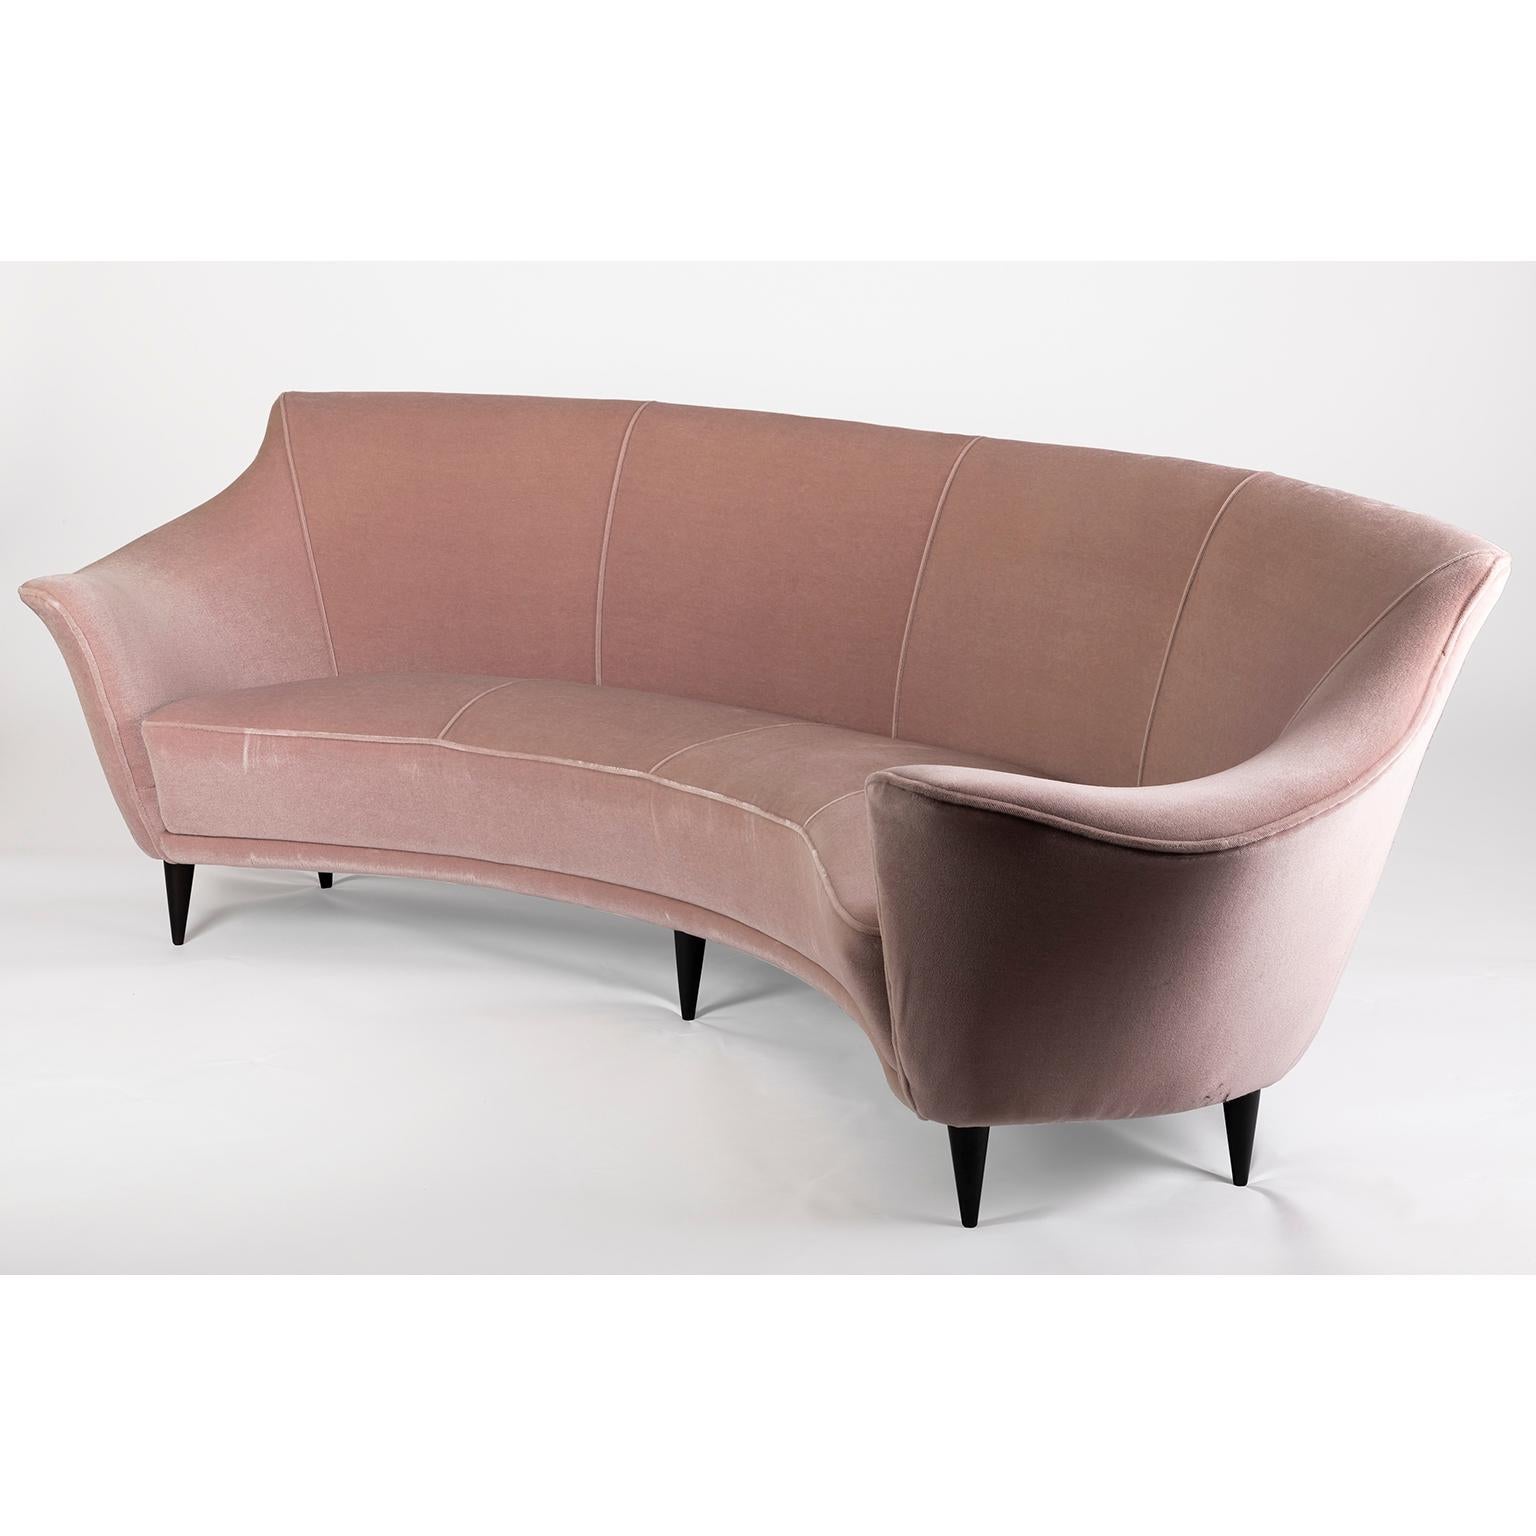 Ico Parisi Curved Four Seat Sofa, Italy, 1951 For Sale 11